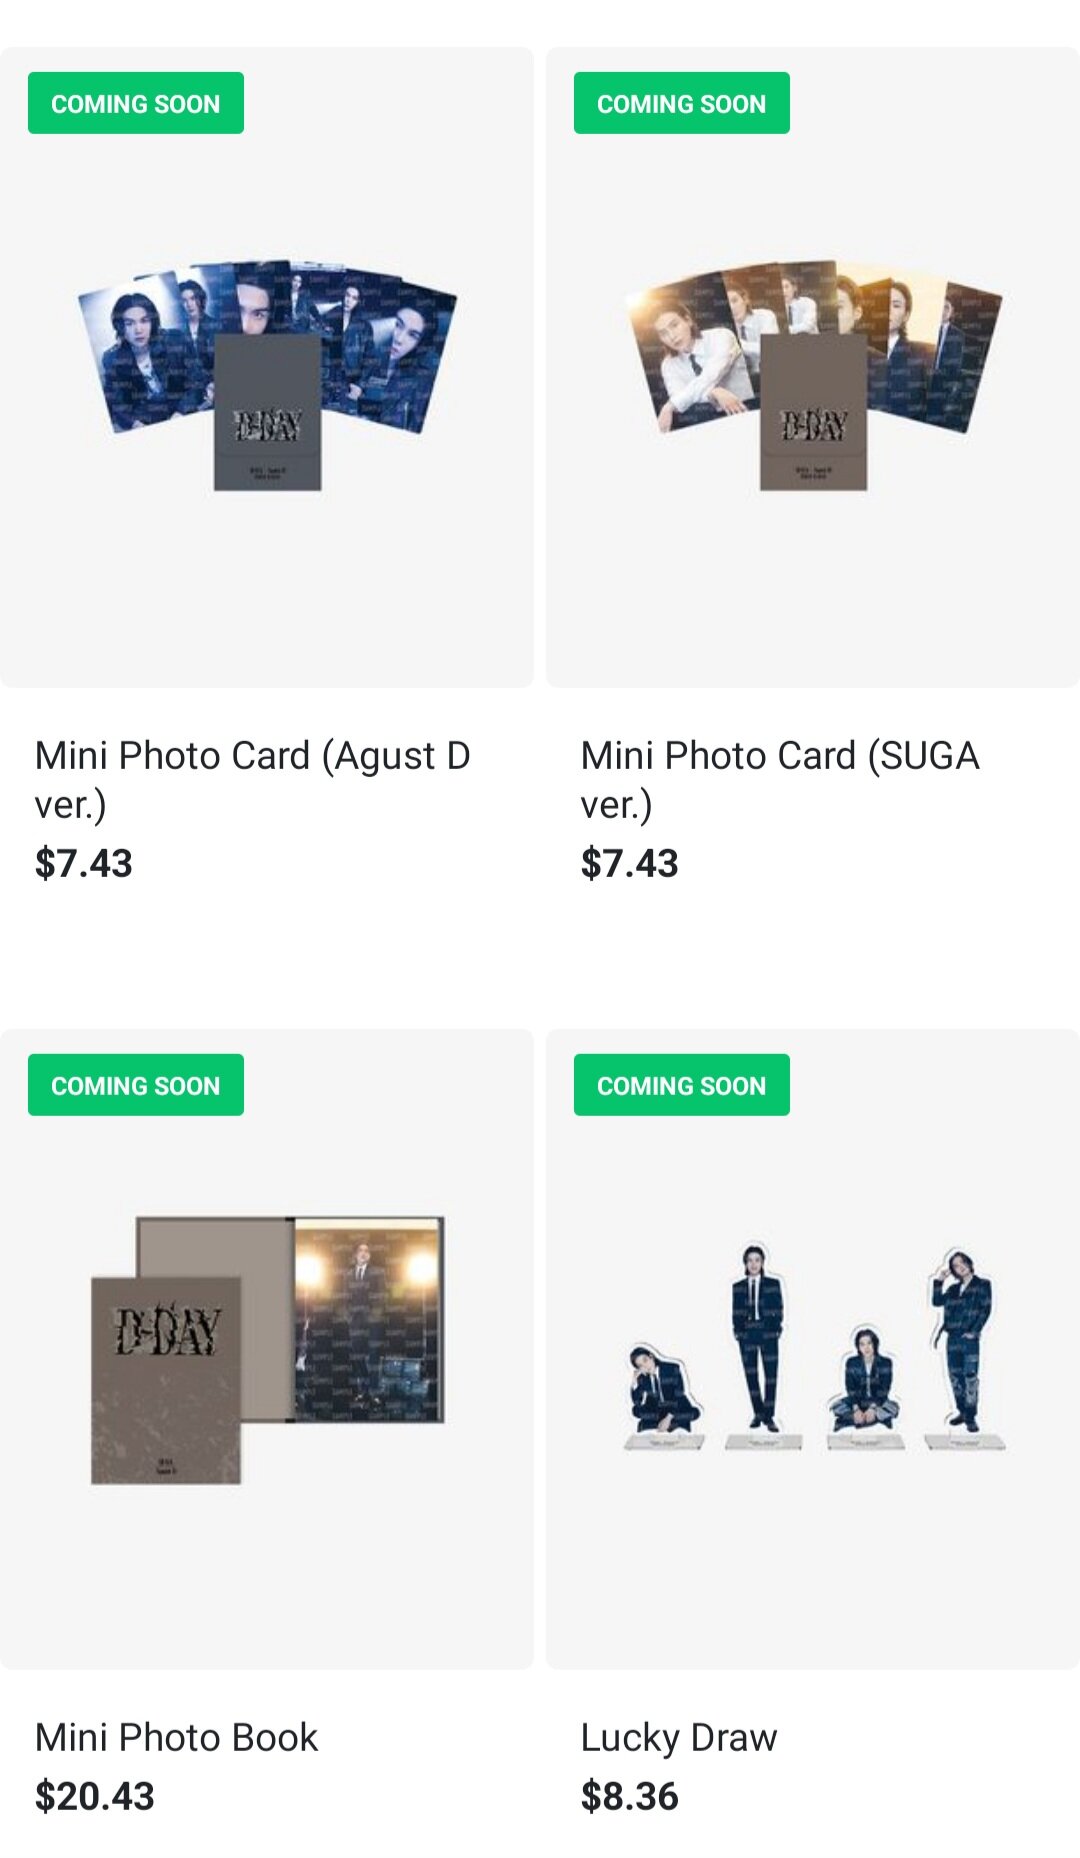 BTS SUGA's merch sells out before even officially going on sale?